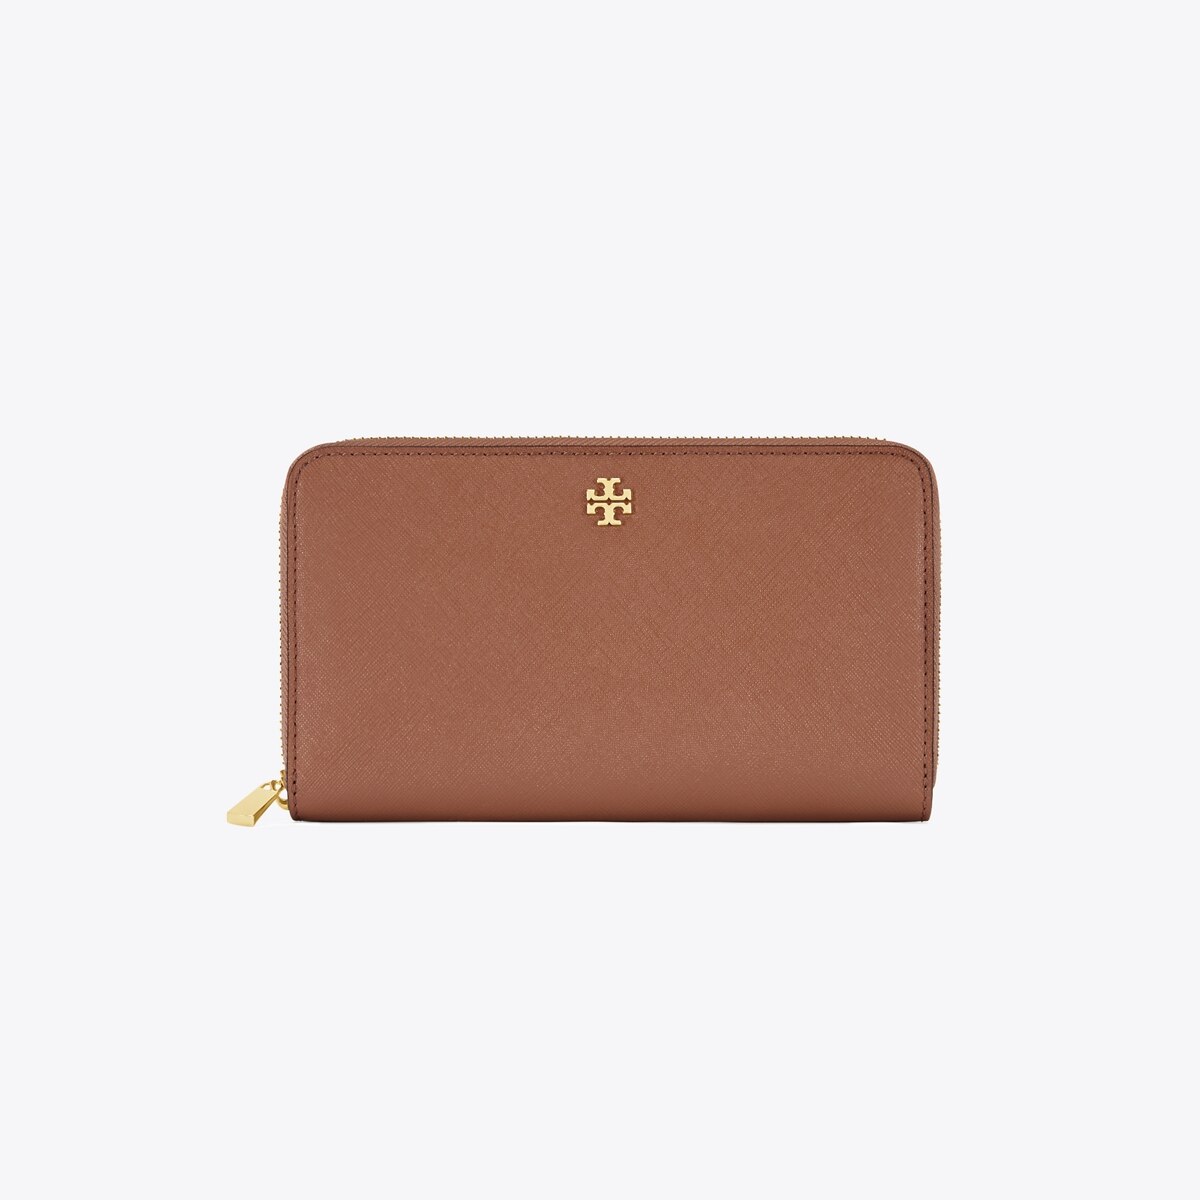 robinson saffiano leather continental wallet